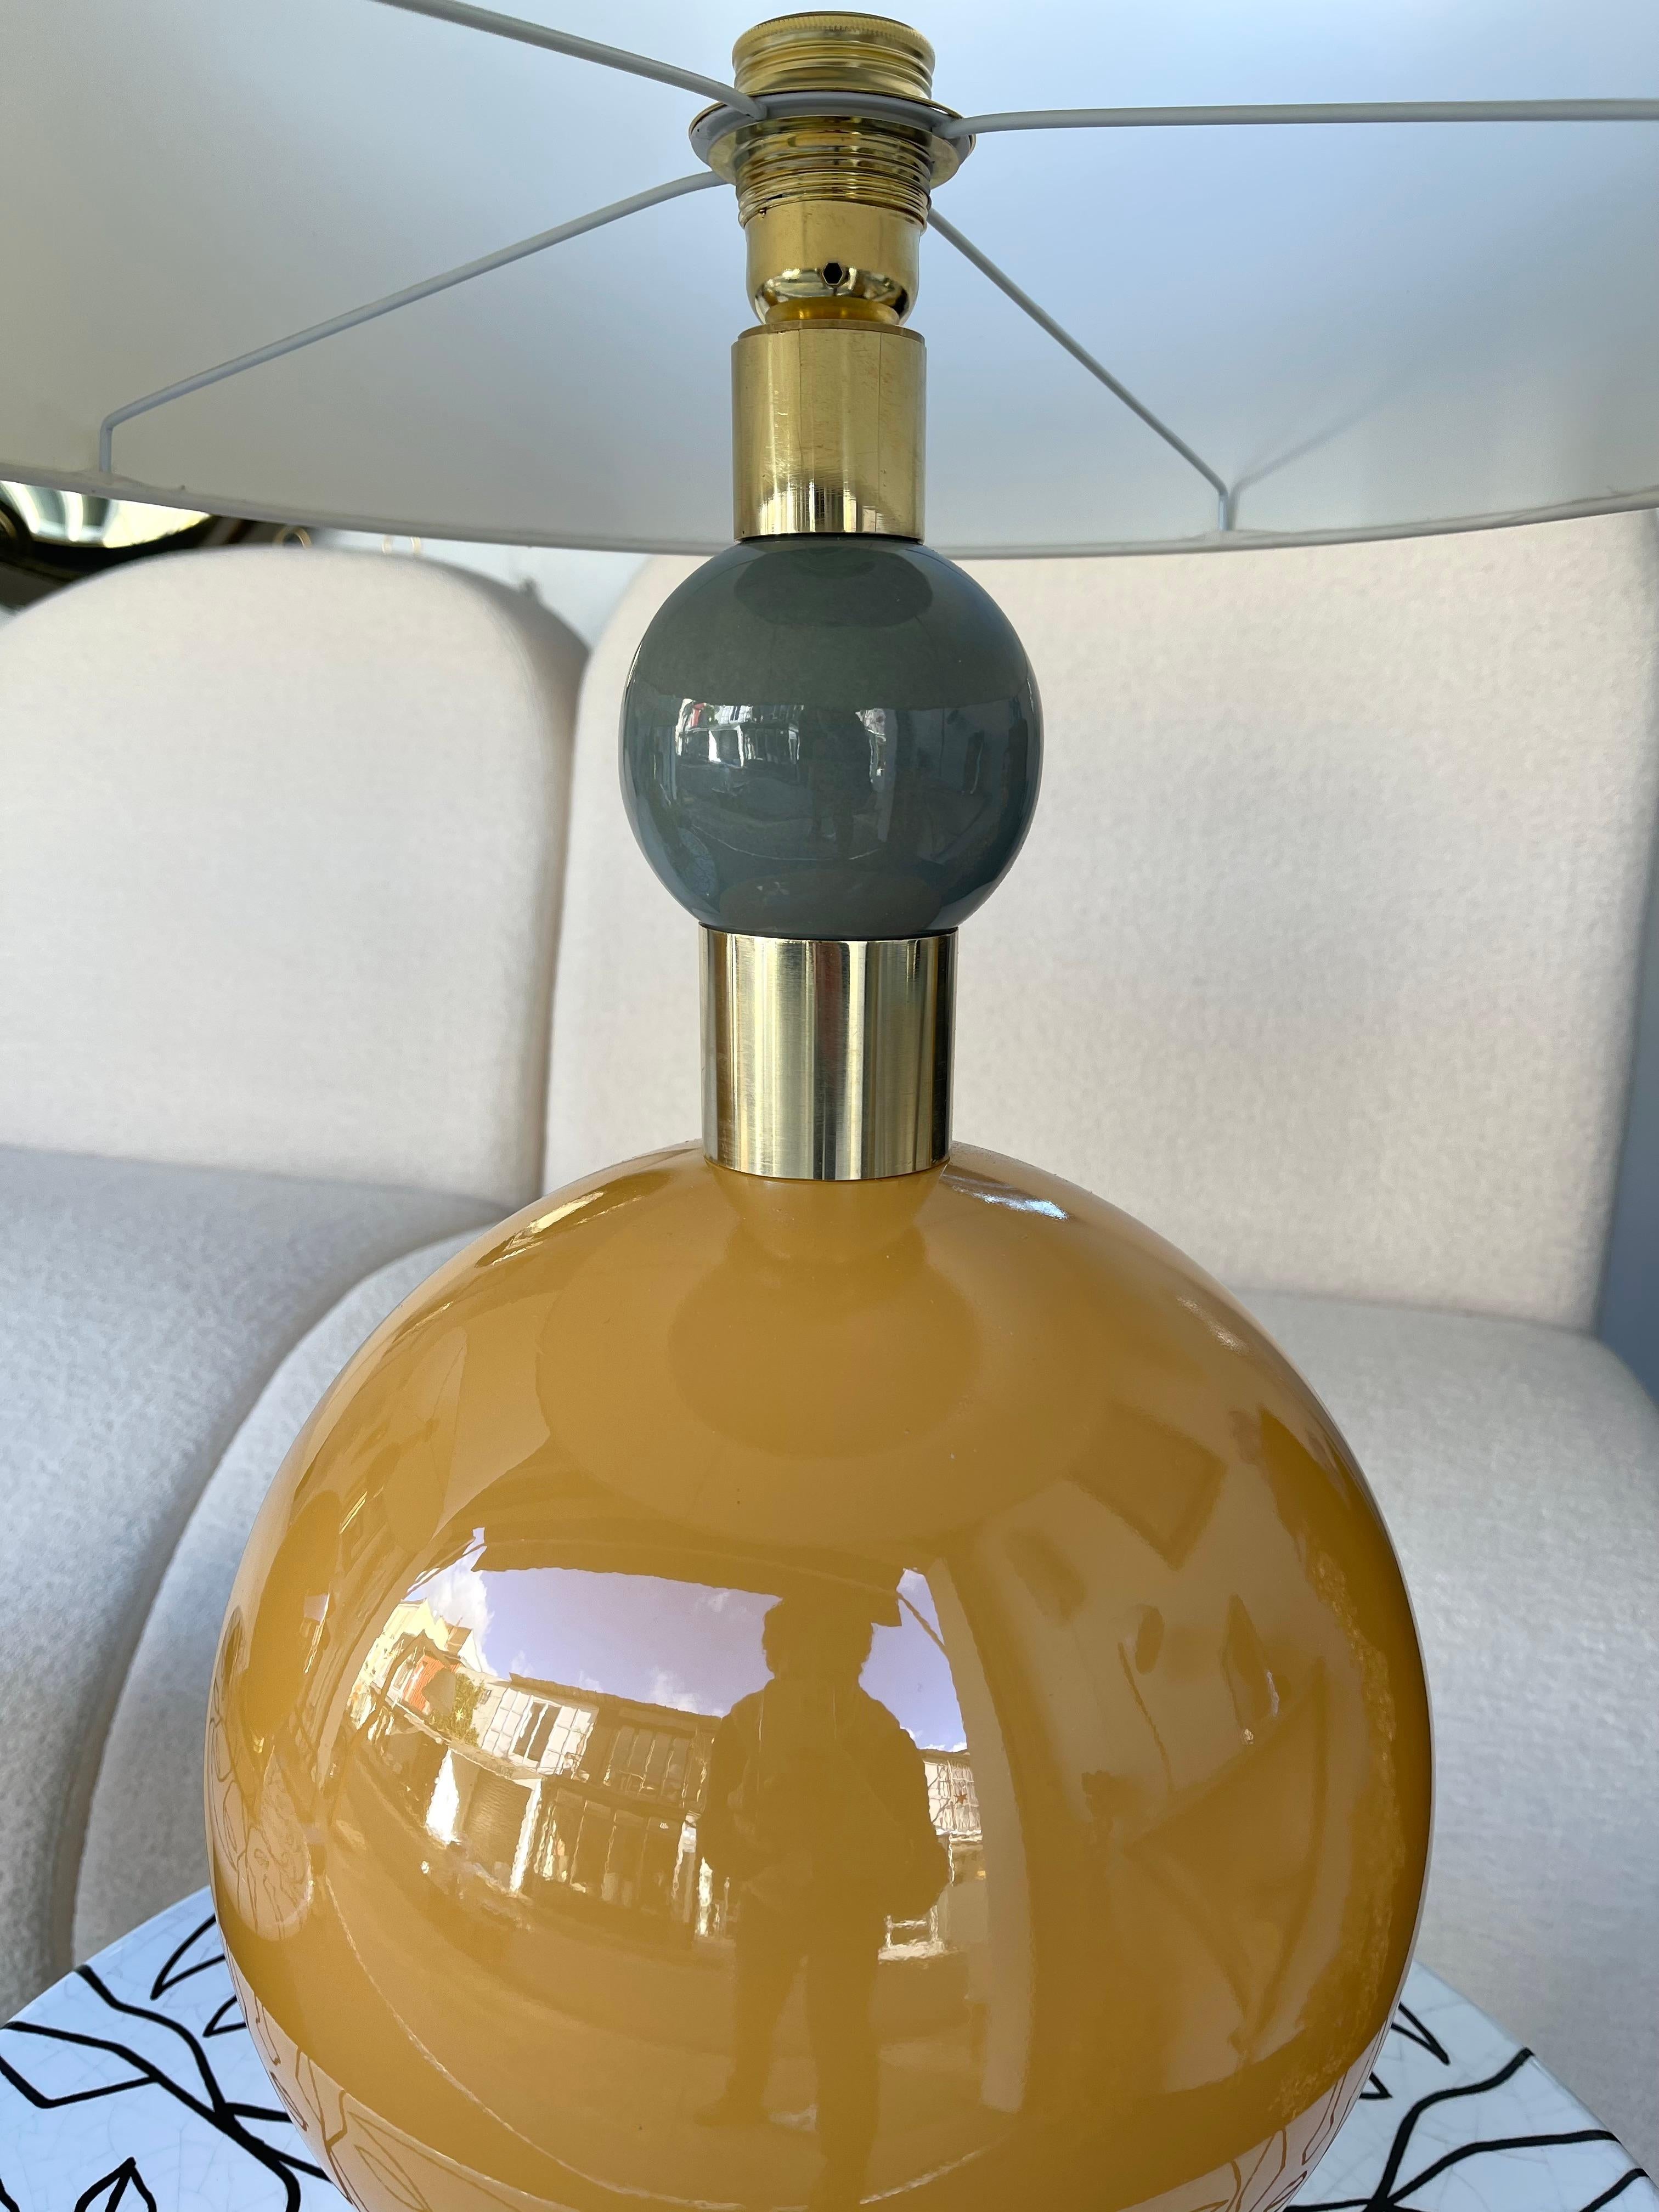 Pair of table or bedside brass lamps orange and gray Murano glass ball. Contemporary work from a small italian artisanal workshop.

Demo shades non included. Measurements in description with demo shades
Measurements lamp only H59 x W29 x D29 cms.